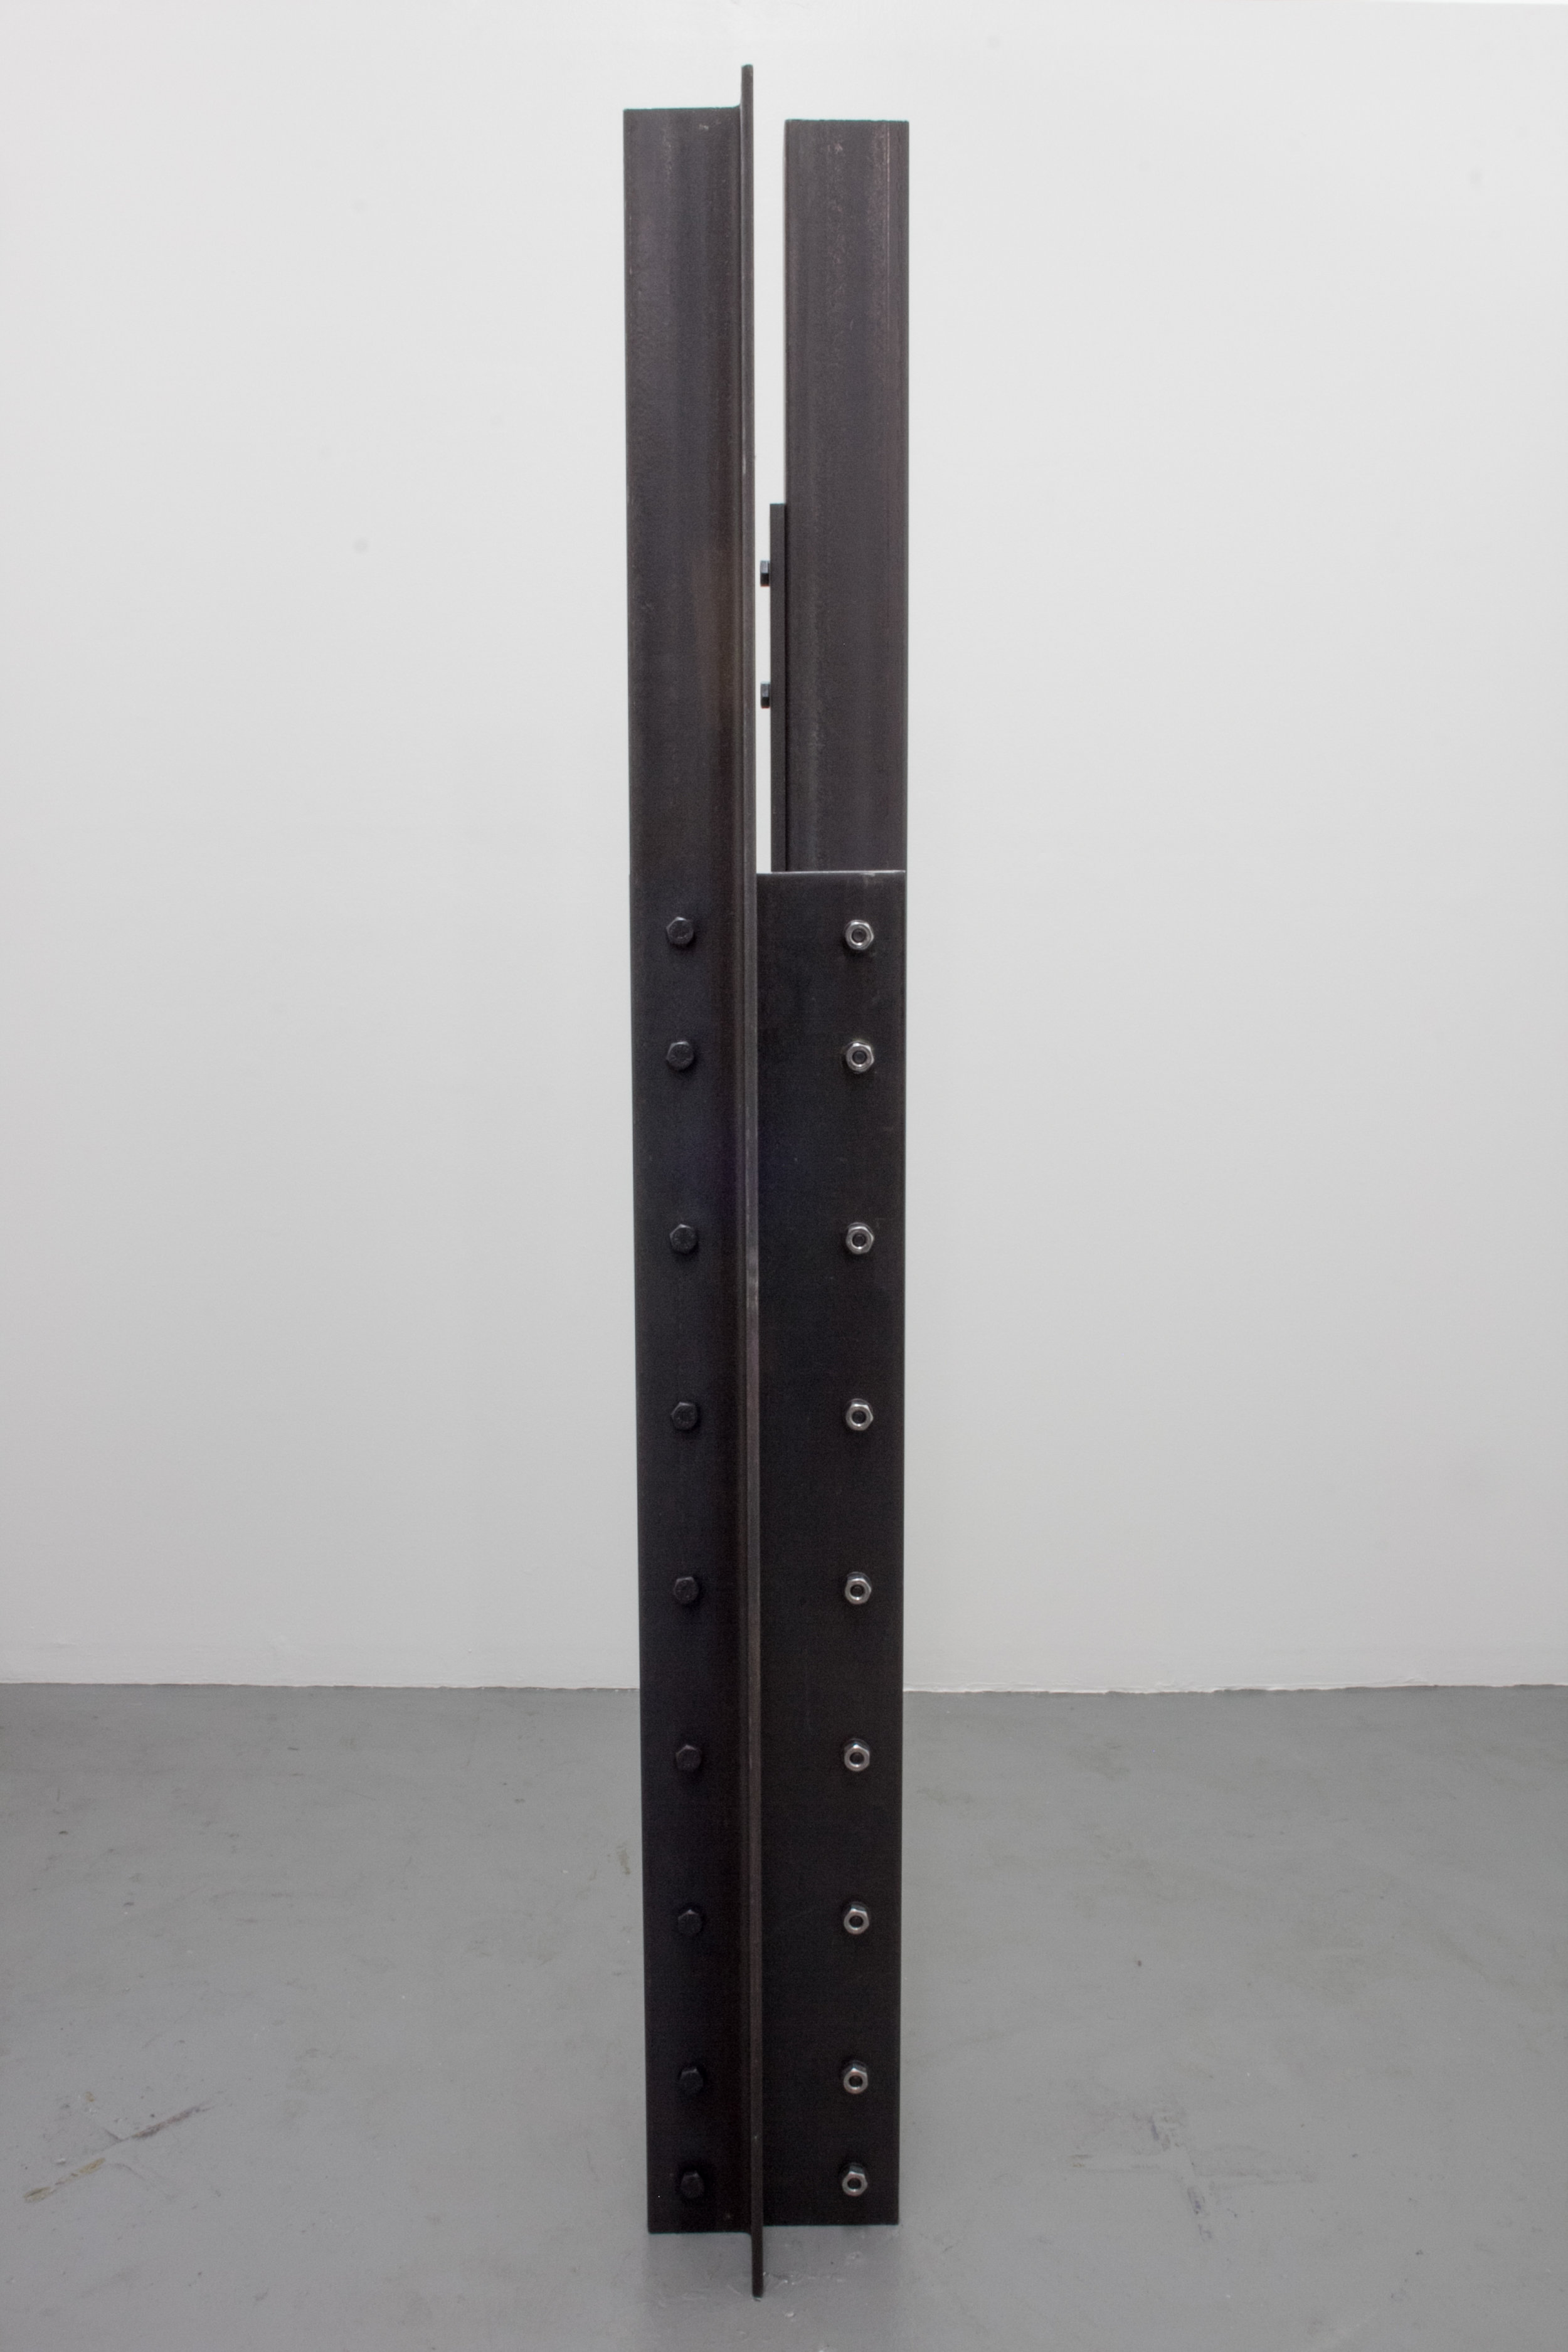   No One To Talk About Failure With , 2015 Steel, hardware 72 x 12 x 12 inches 